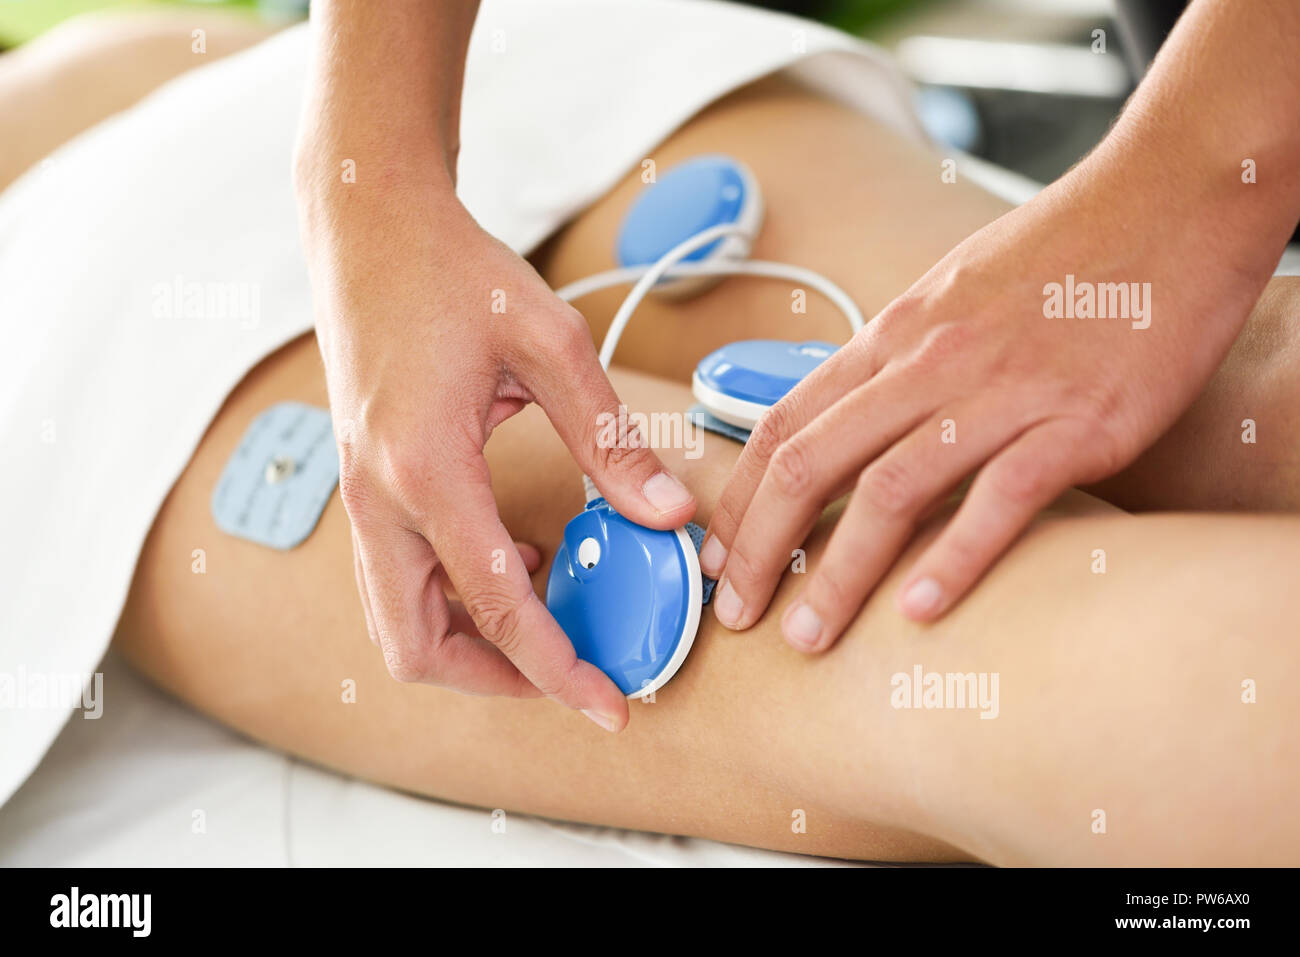 https://c8.alamy.com/comp/PW6AX0/physiotherapist-applying-electro-stimulation-in-physical-therapy-to-a-young-woman-medical-check-at-the-leg-in-a-physiotherapy-center-PW6AX0.jpg